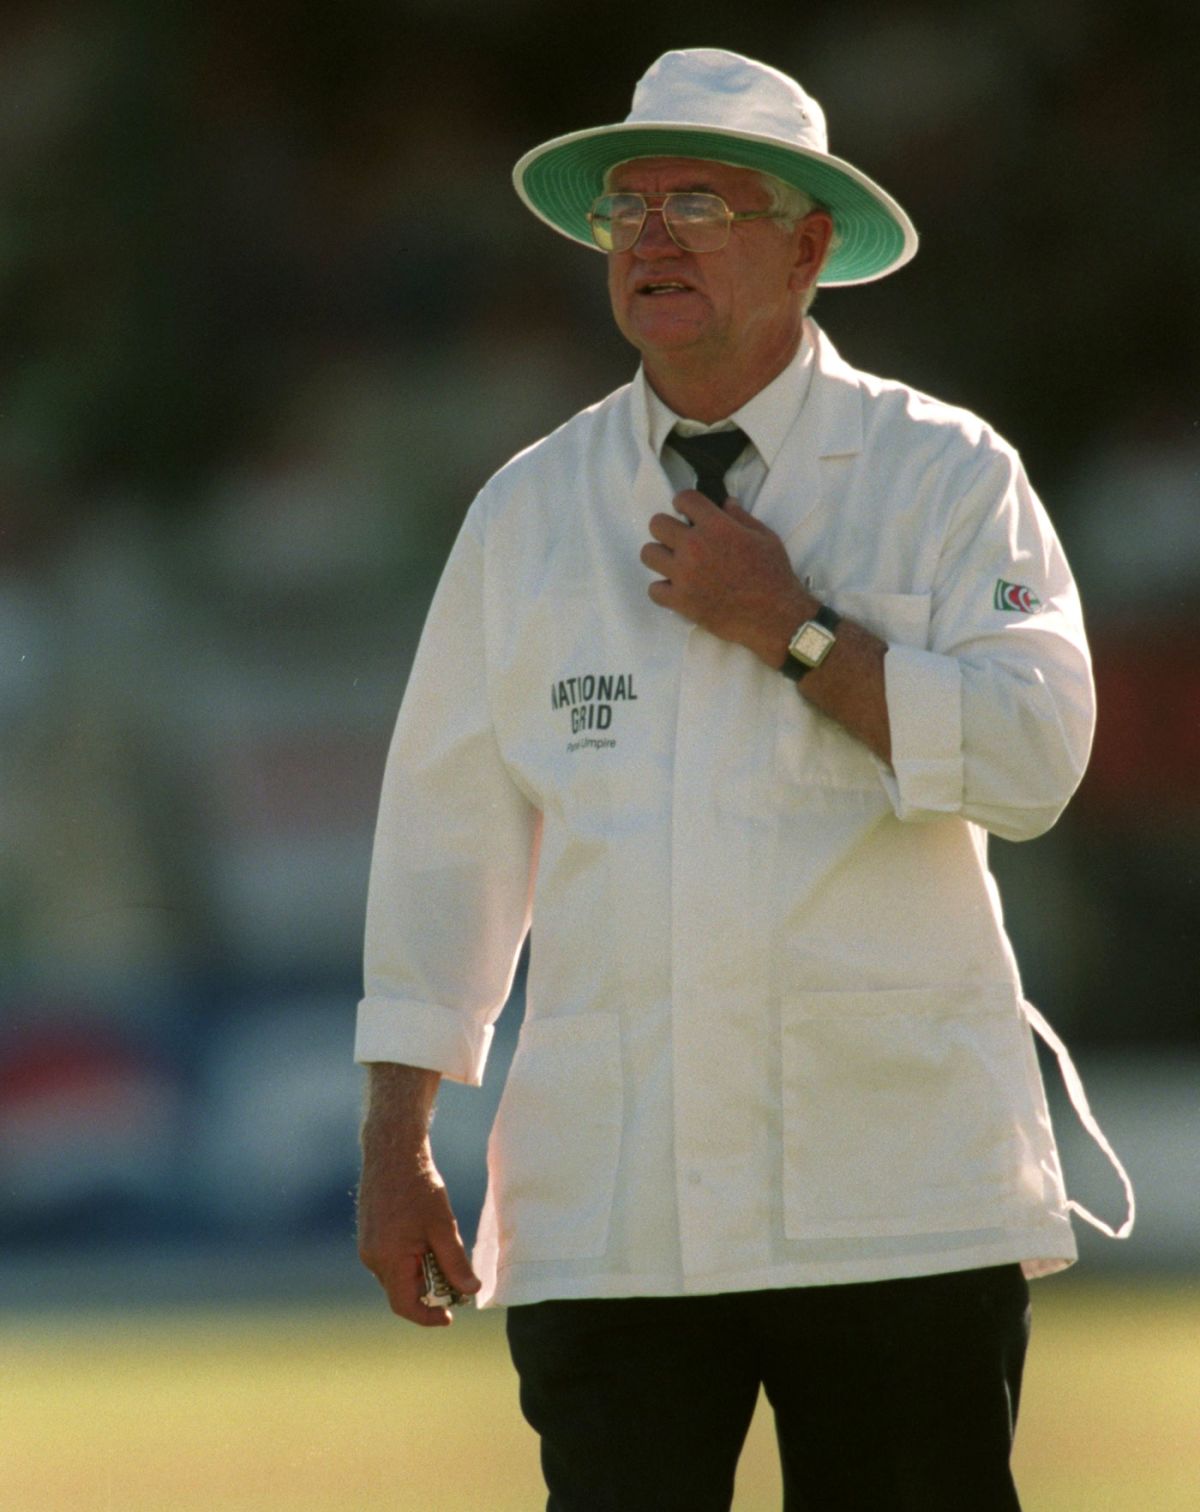 Umpire Cyril Mitchley stands in the Barbados Test, West Indies v England, 5th Test, Bridgetown, 1st day, March 12, 1998